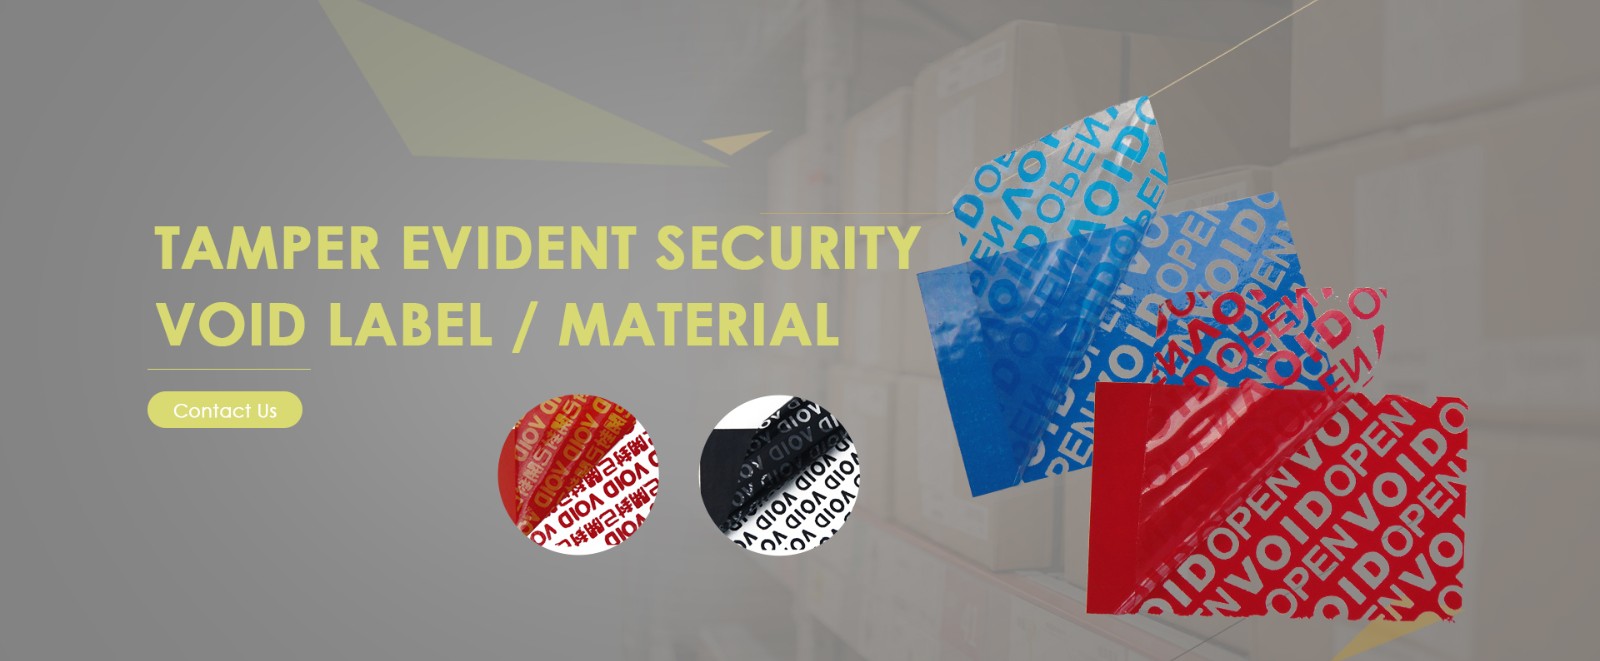 Application and function of Tamper Evident Security label tape